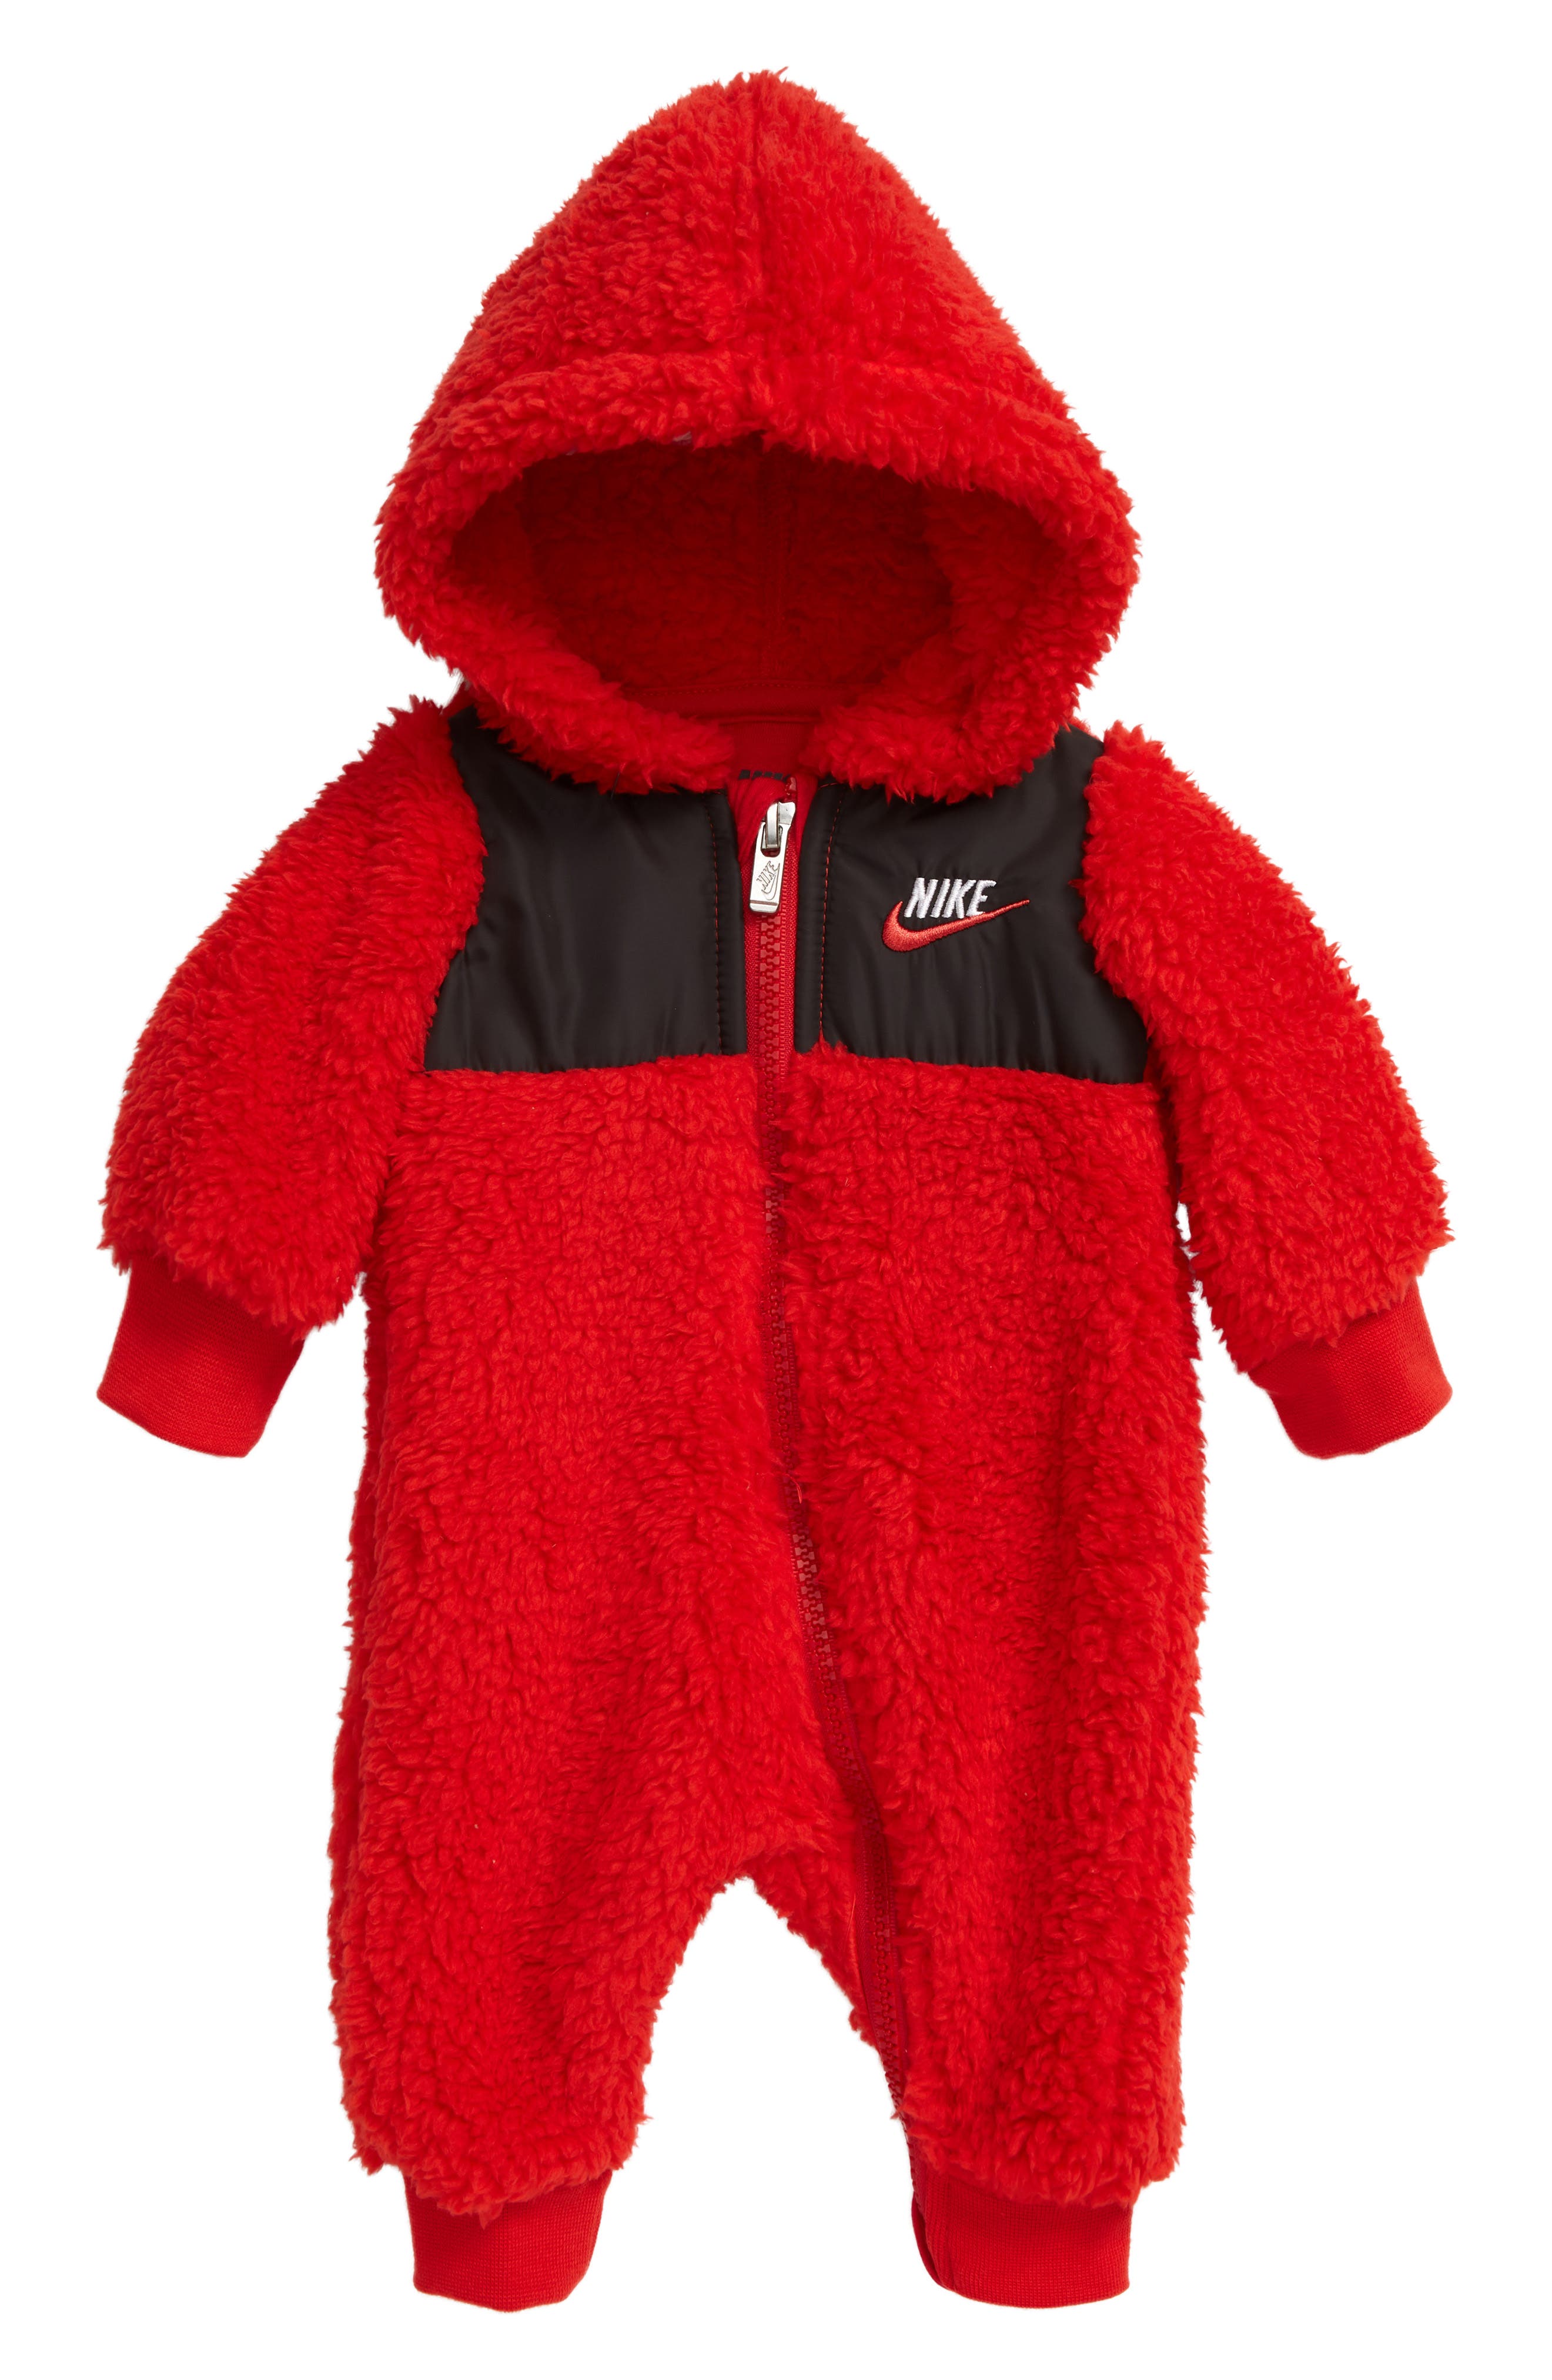 Baby Nike Clothing | Nordstrom